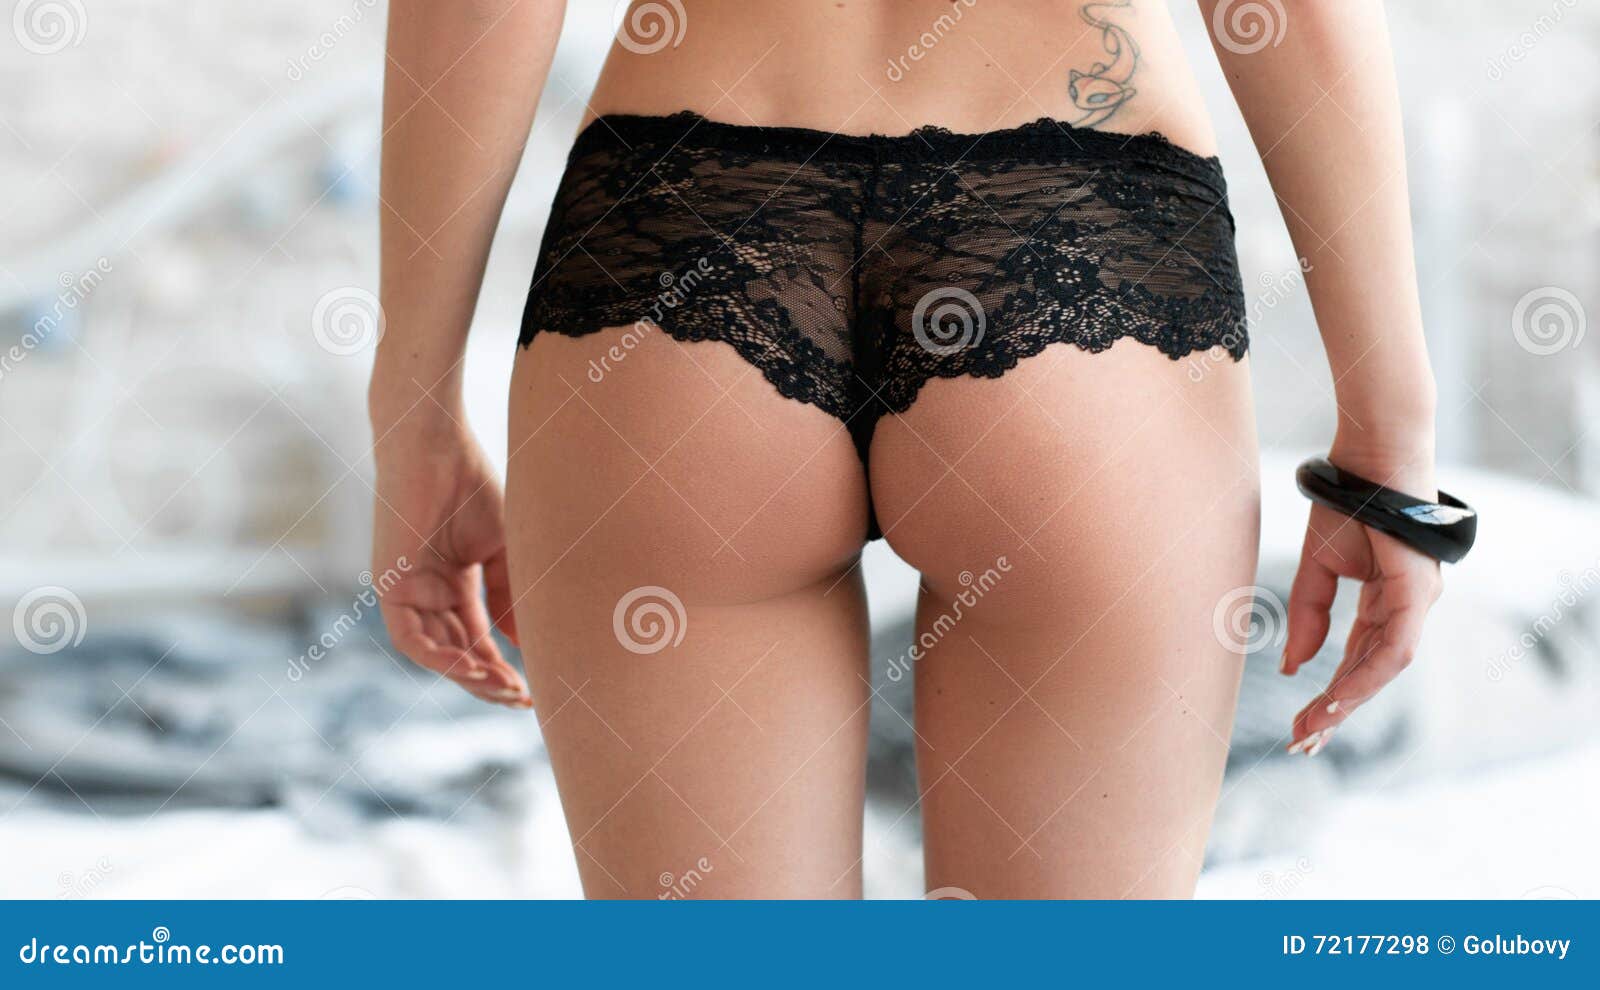 daniel menko recommends perfect ass in lingerie pic